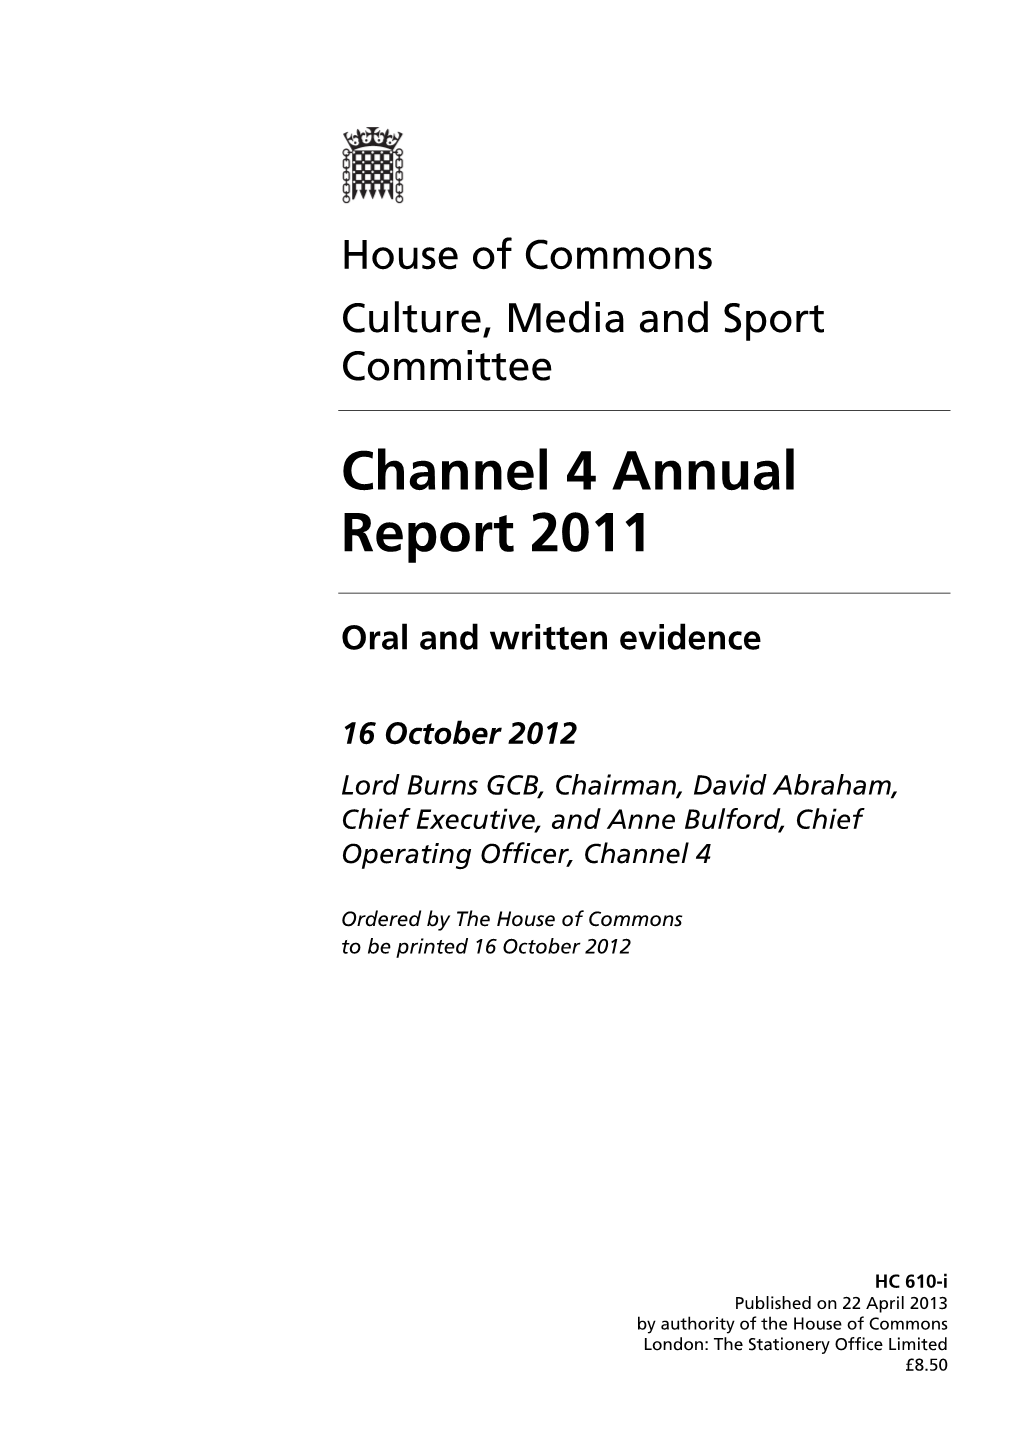 Channel 4 Annual Report 2011